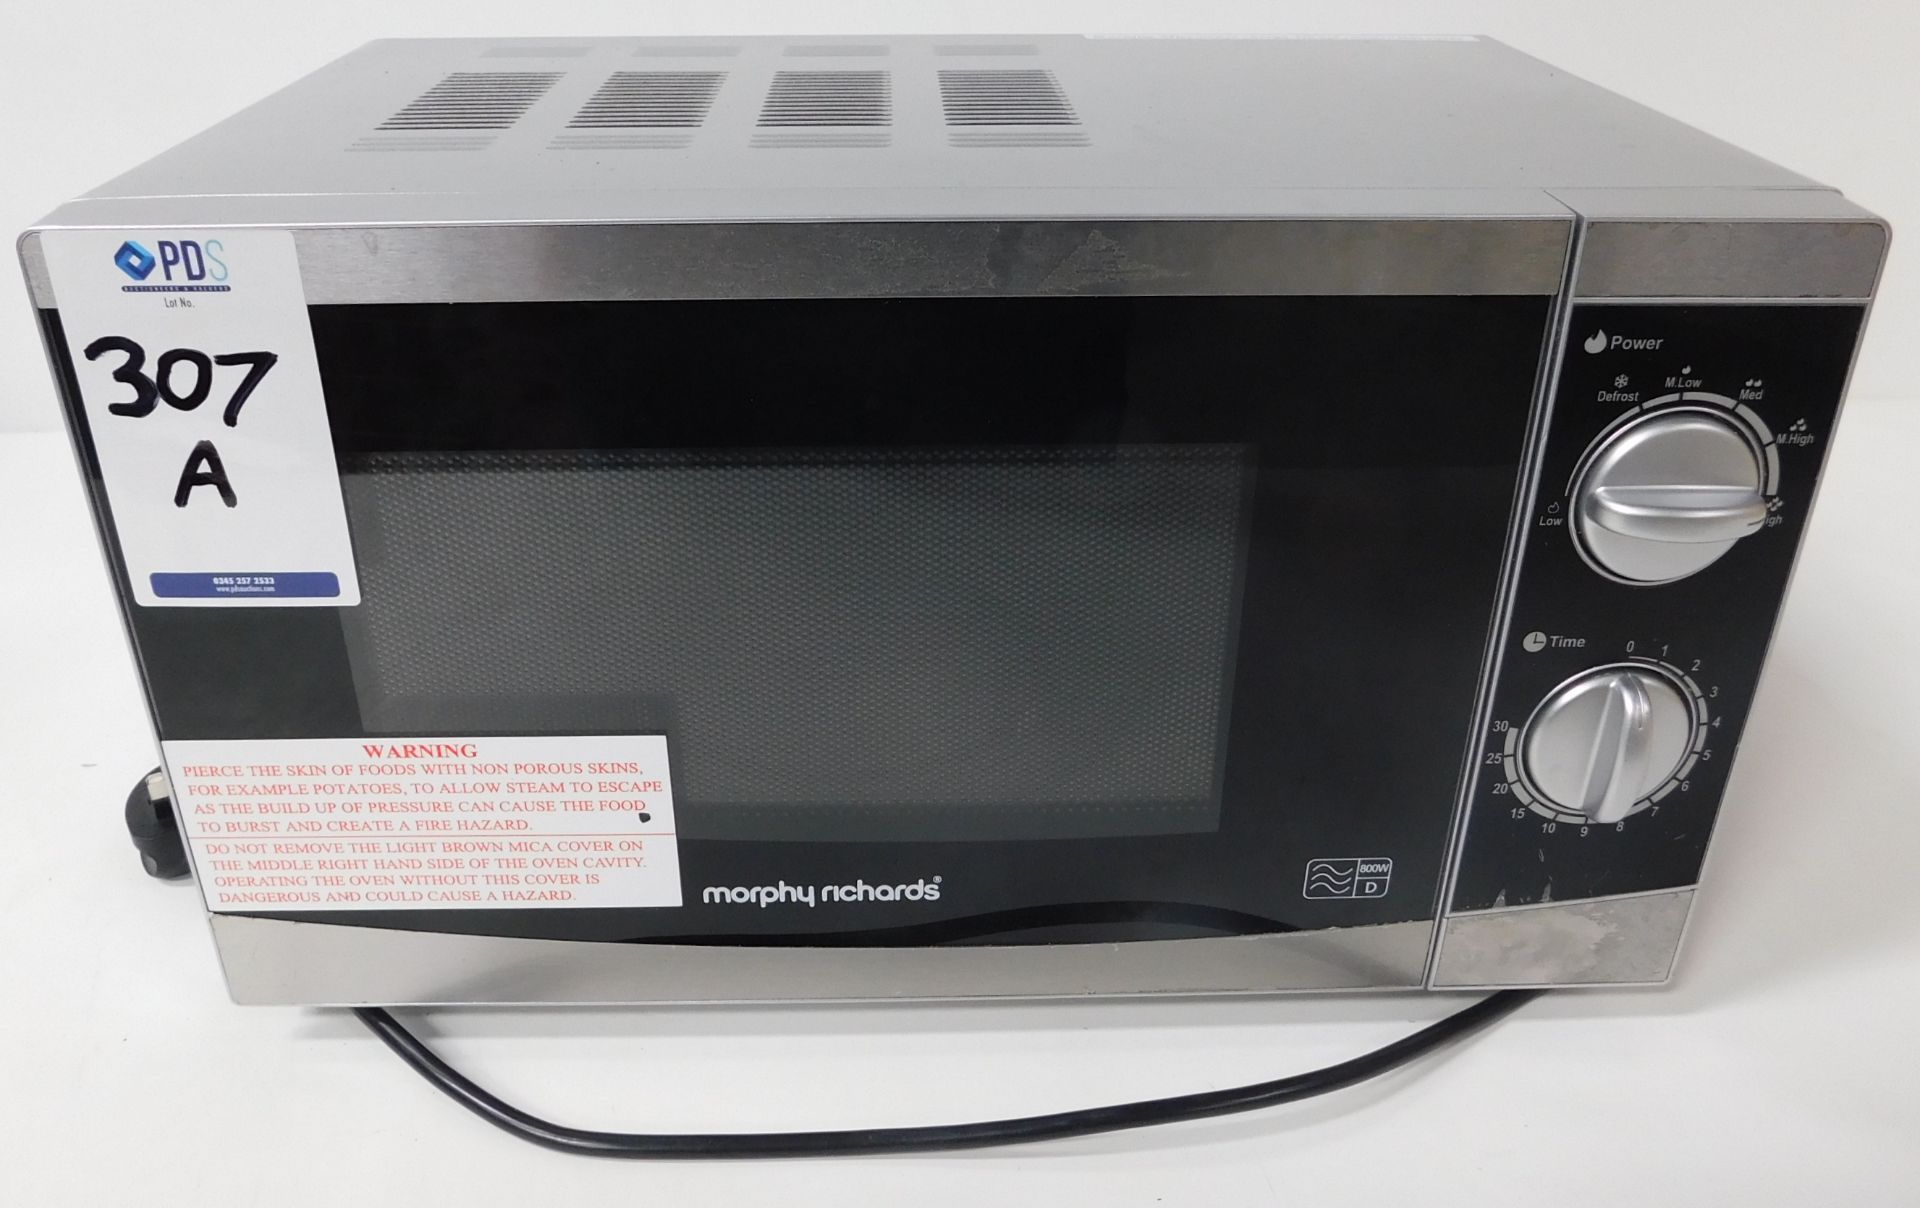 Morphy Richards P8OH20P-YU Microwave (Location: Brentwood - See General Notes for Details)